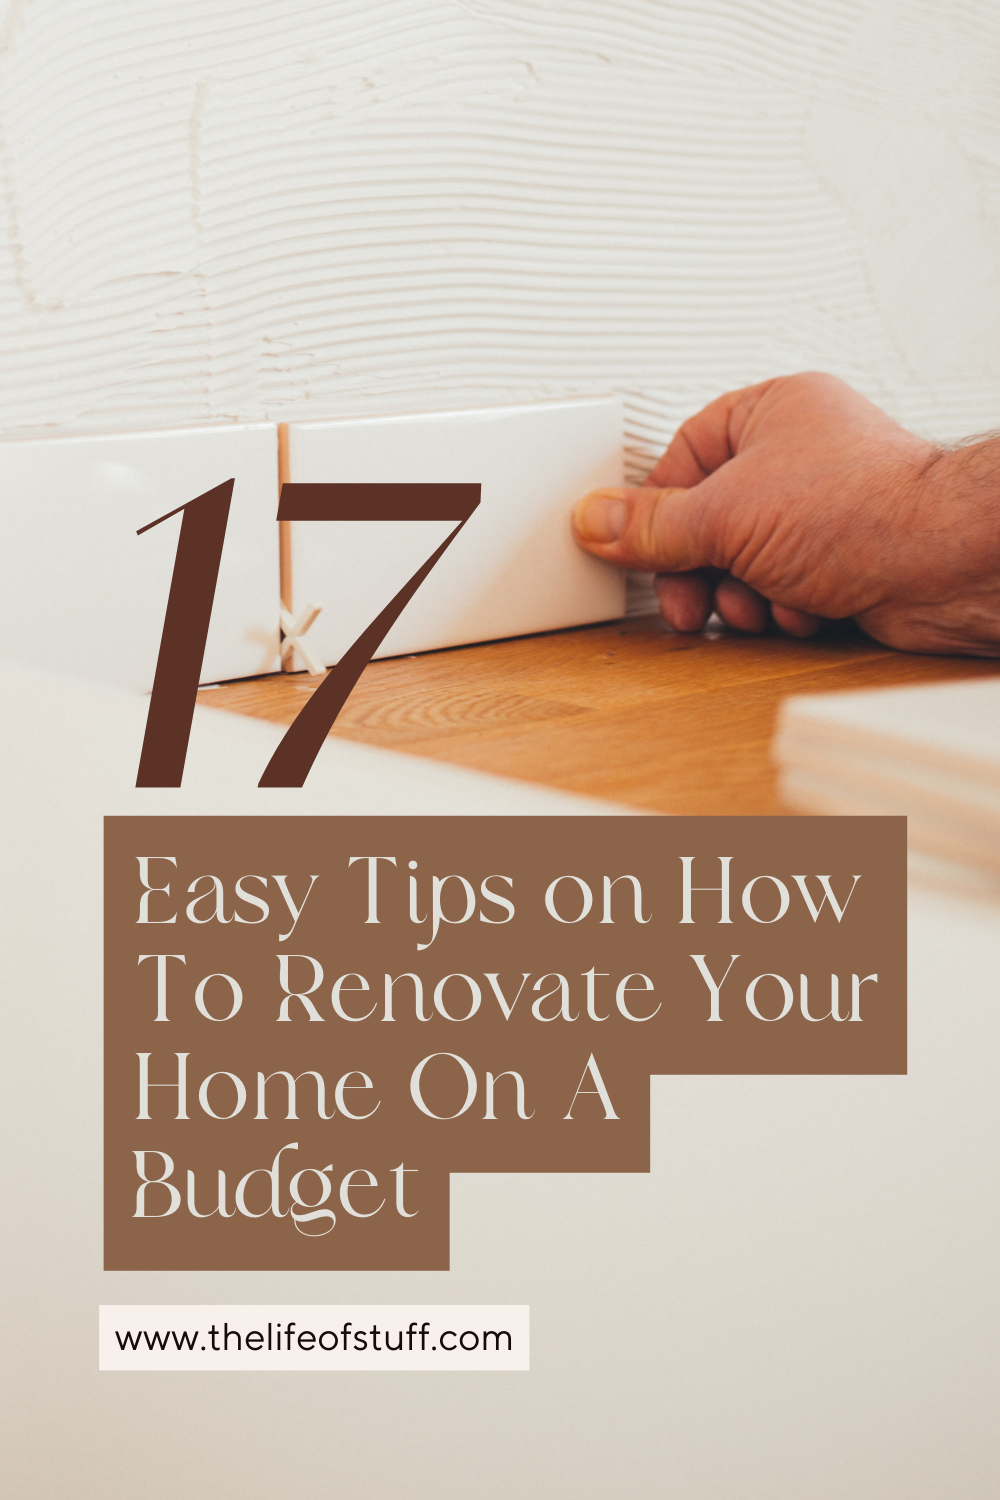 How To Renovate Your Home On A Budget With 17 Easy Tips! - The Life of Stuff